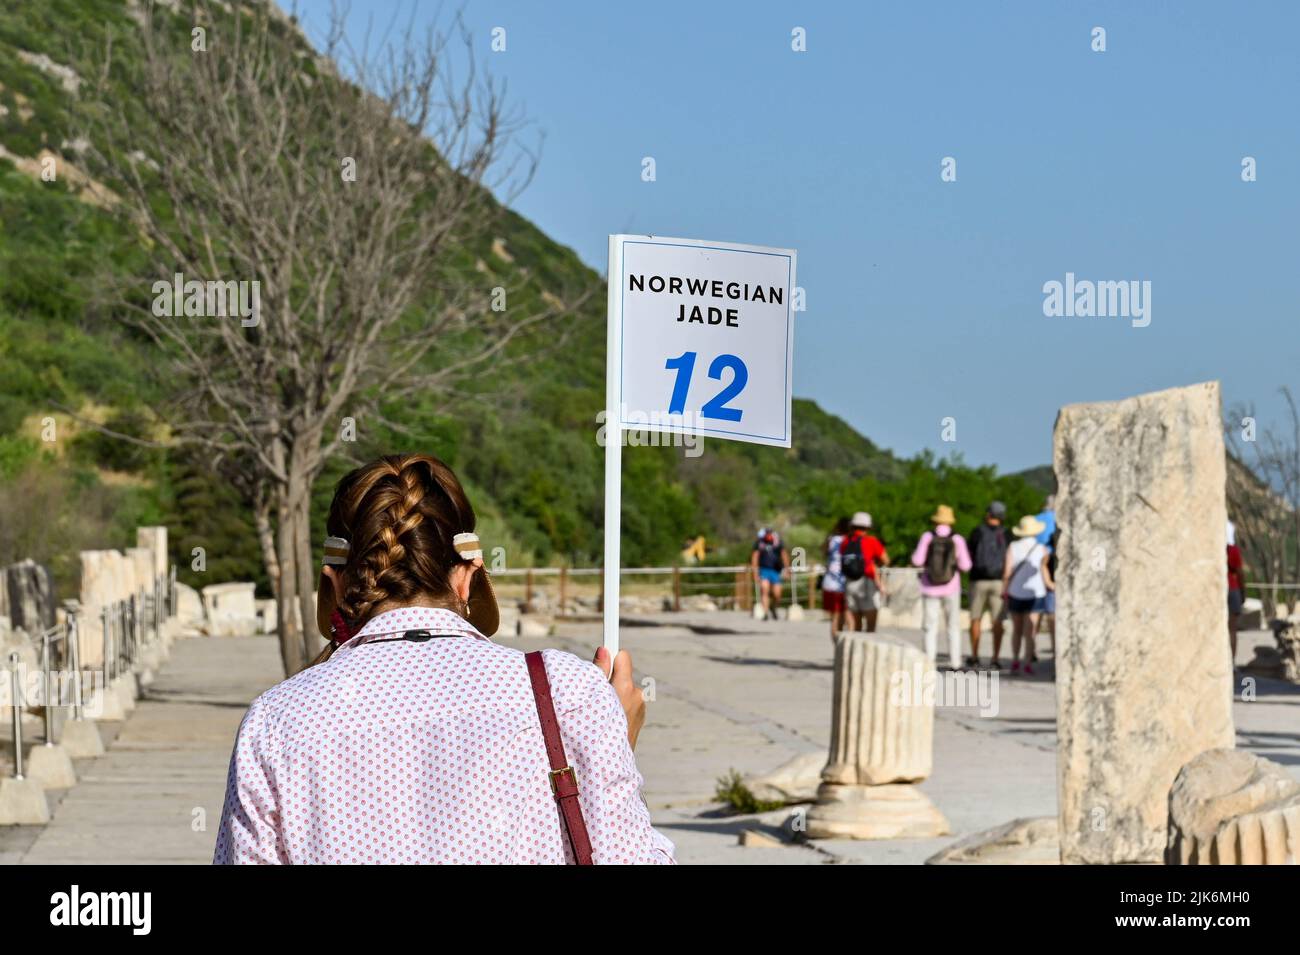 Ephesus, Kusadasi, Turkey - May 2022: Tour guide holding up a flag for her tour group to follow through the ruins of the ancient city of the Roman Emp Stock Photo